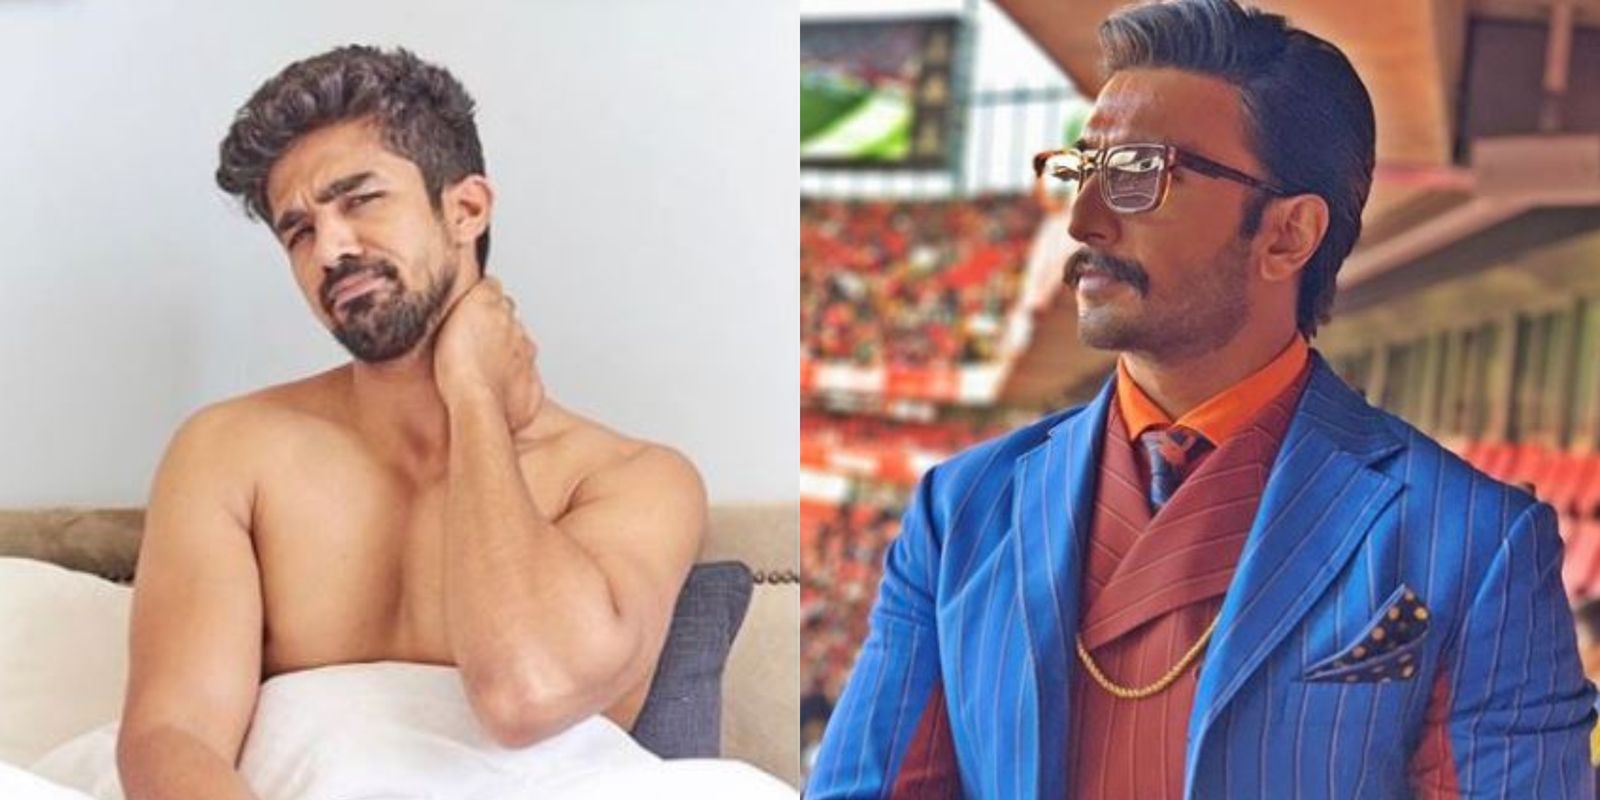 Saquib Saleem Keeps His Promise To Ranveer Singh By Posting A Shirtless Picture, The 83 Captain Has A Hilarious Response